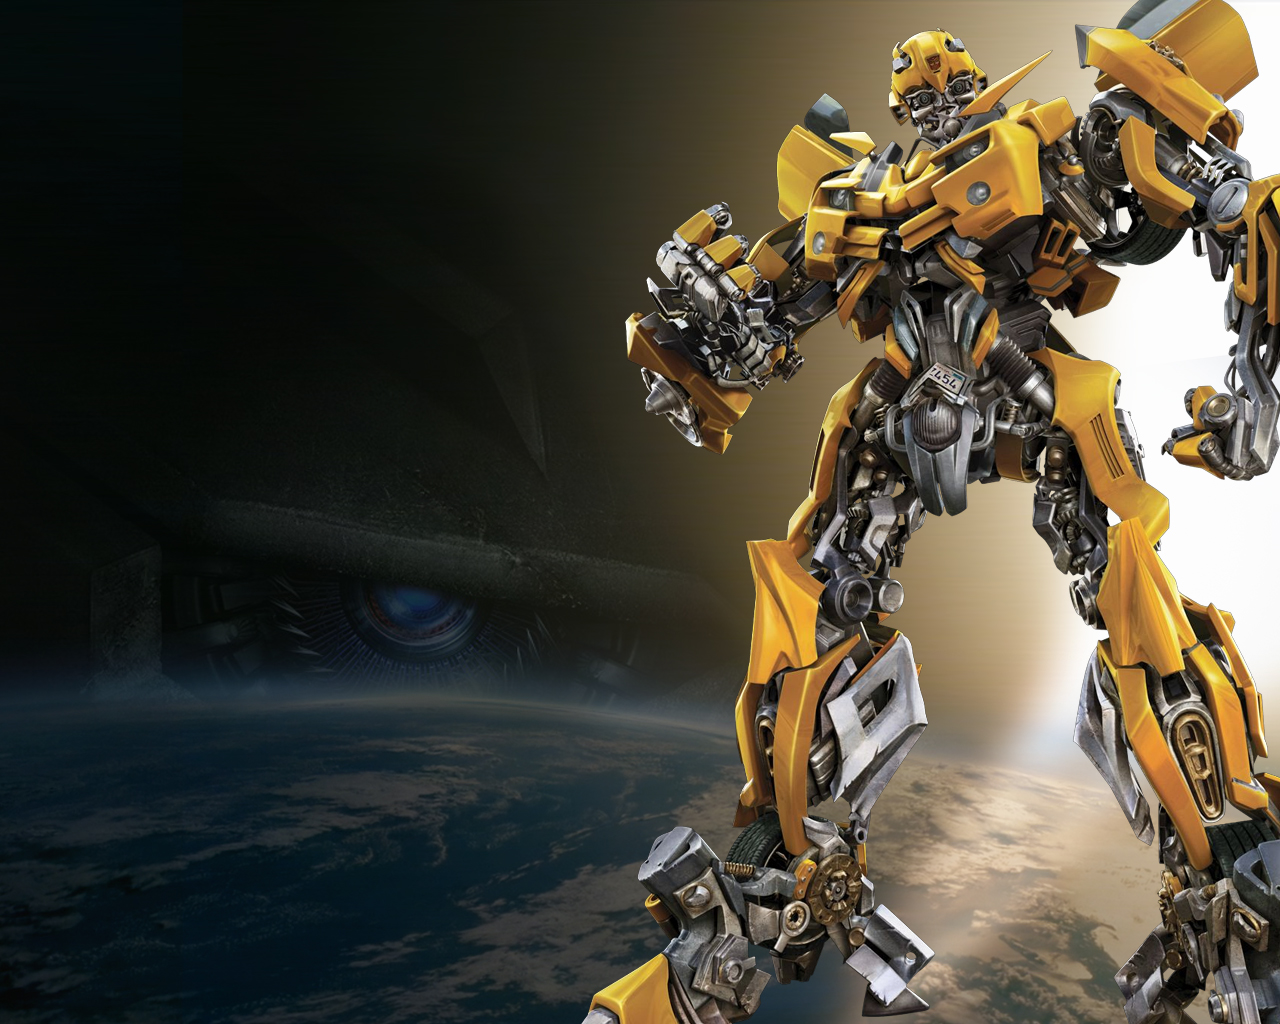 Transformers Wallpaper Photos Beautifully Pictured On Digital Photo